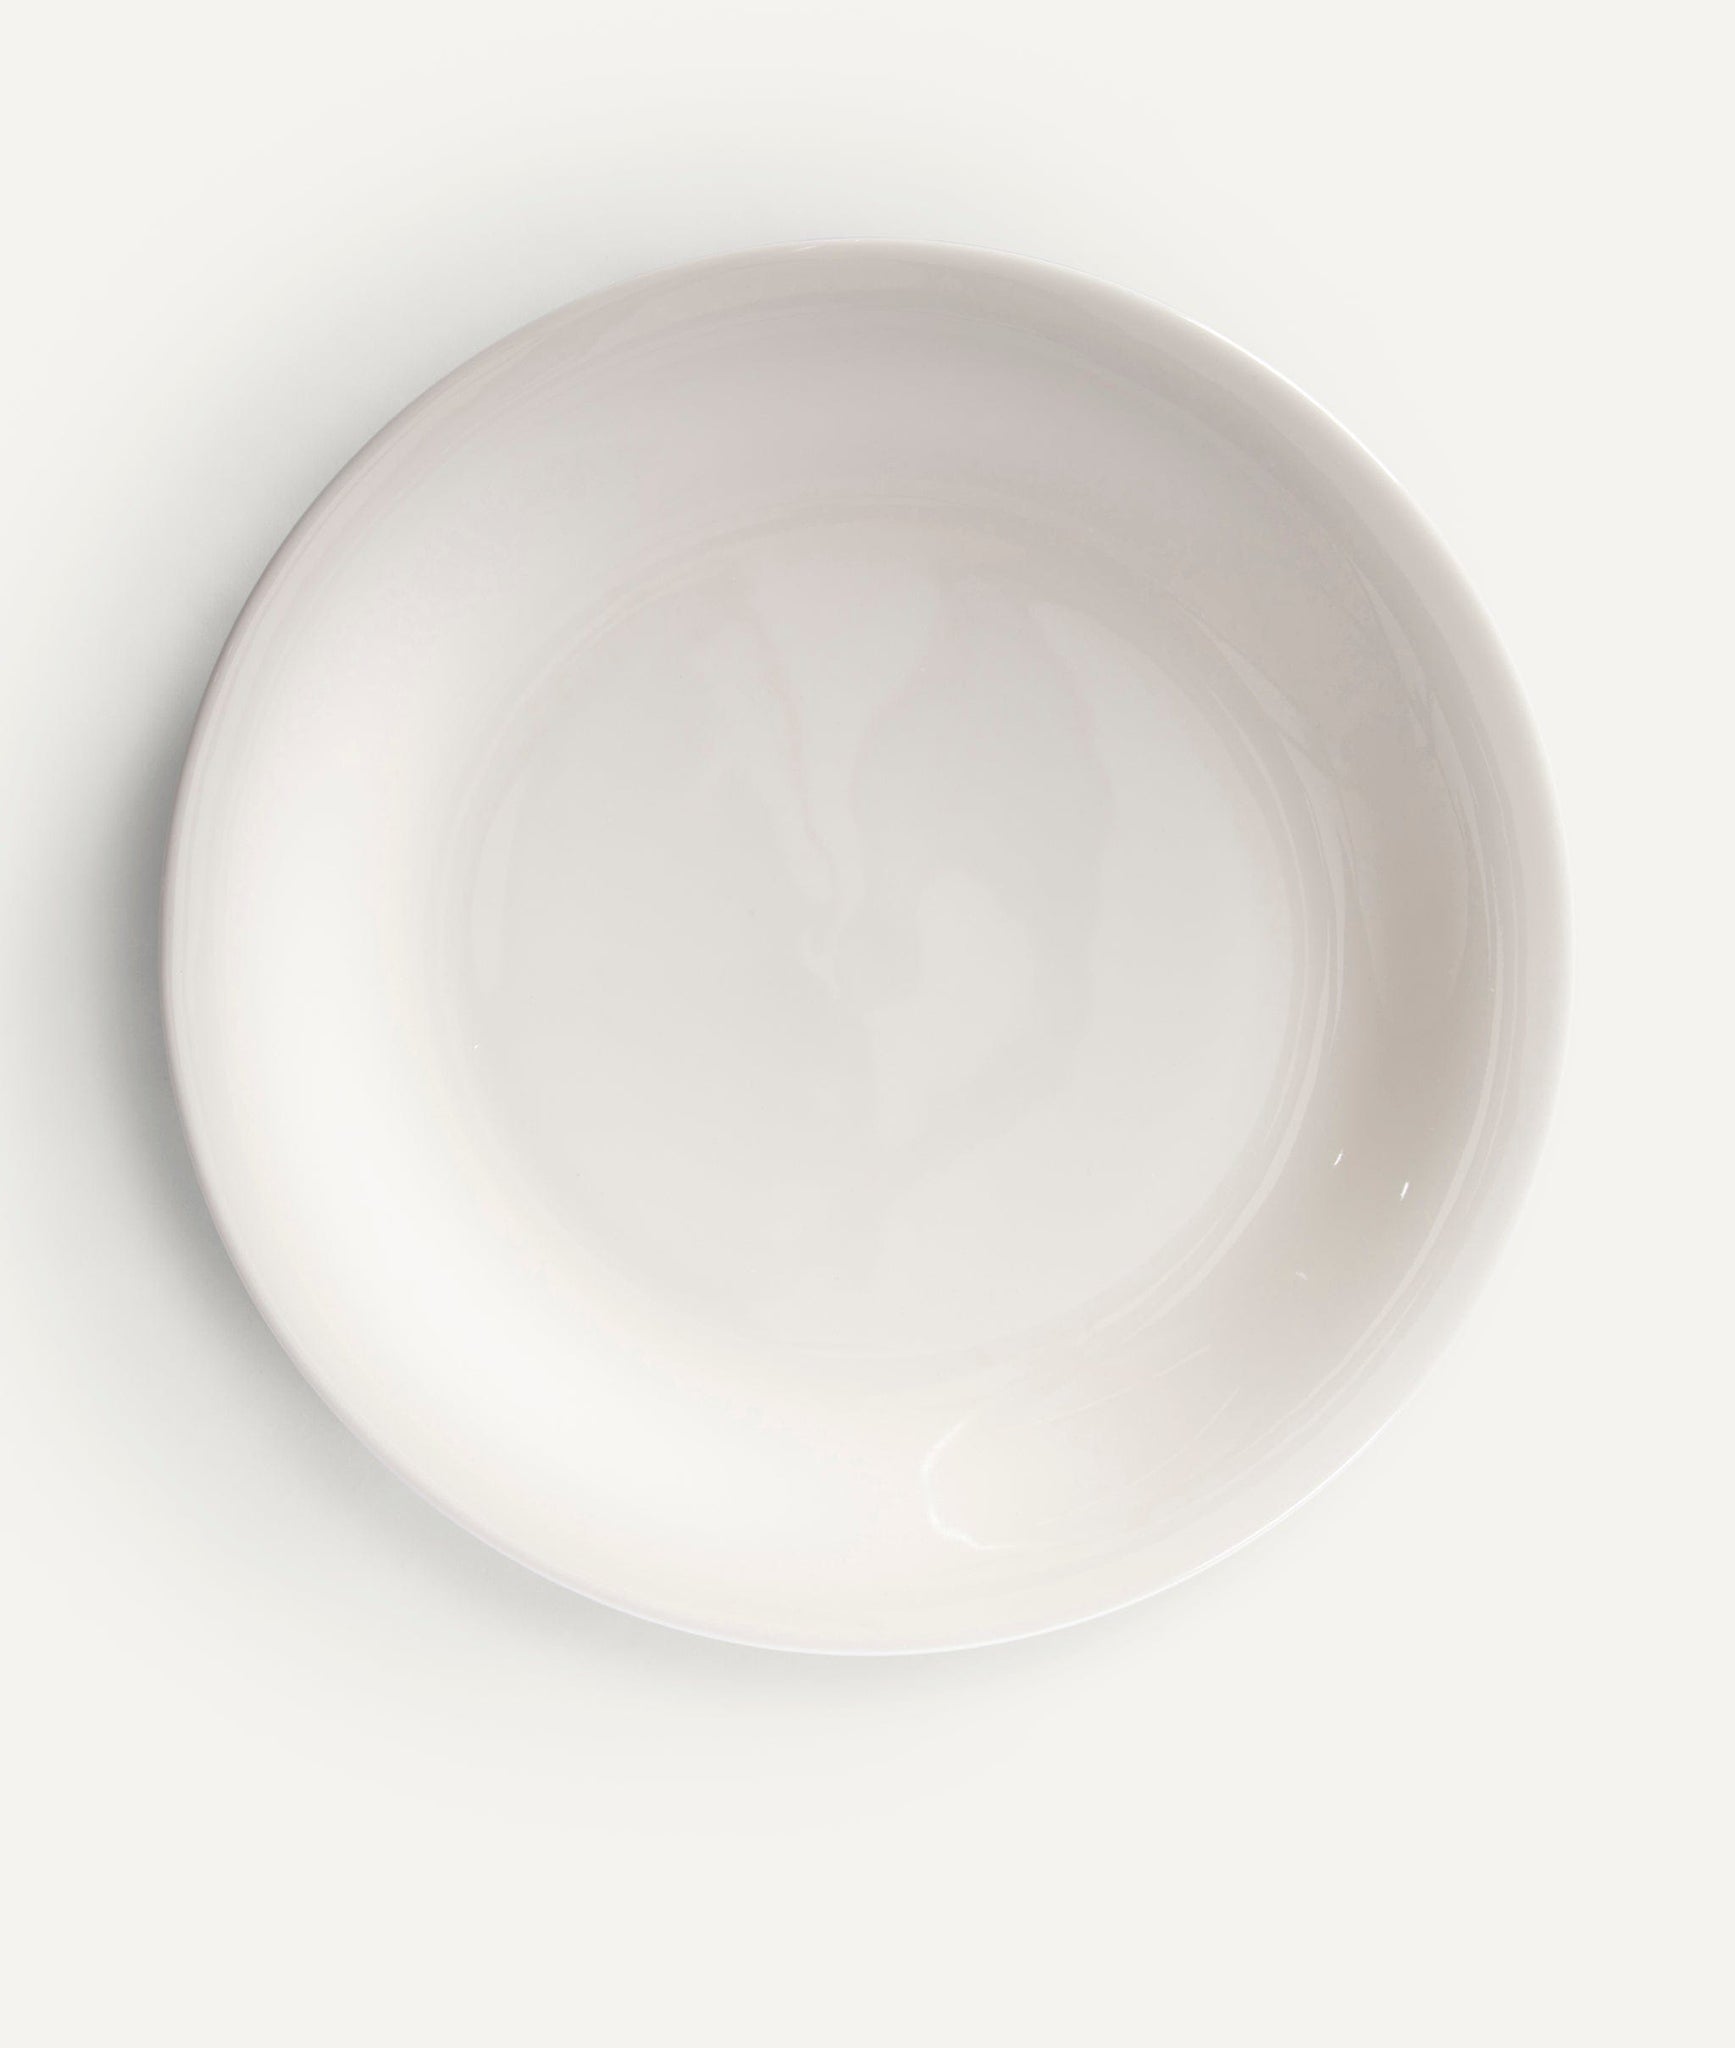 Plate Set "Drop" in Finebone China - 24 Pieces